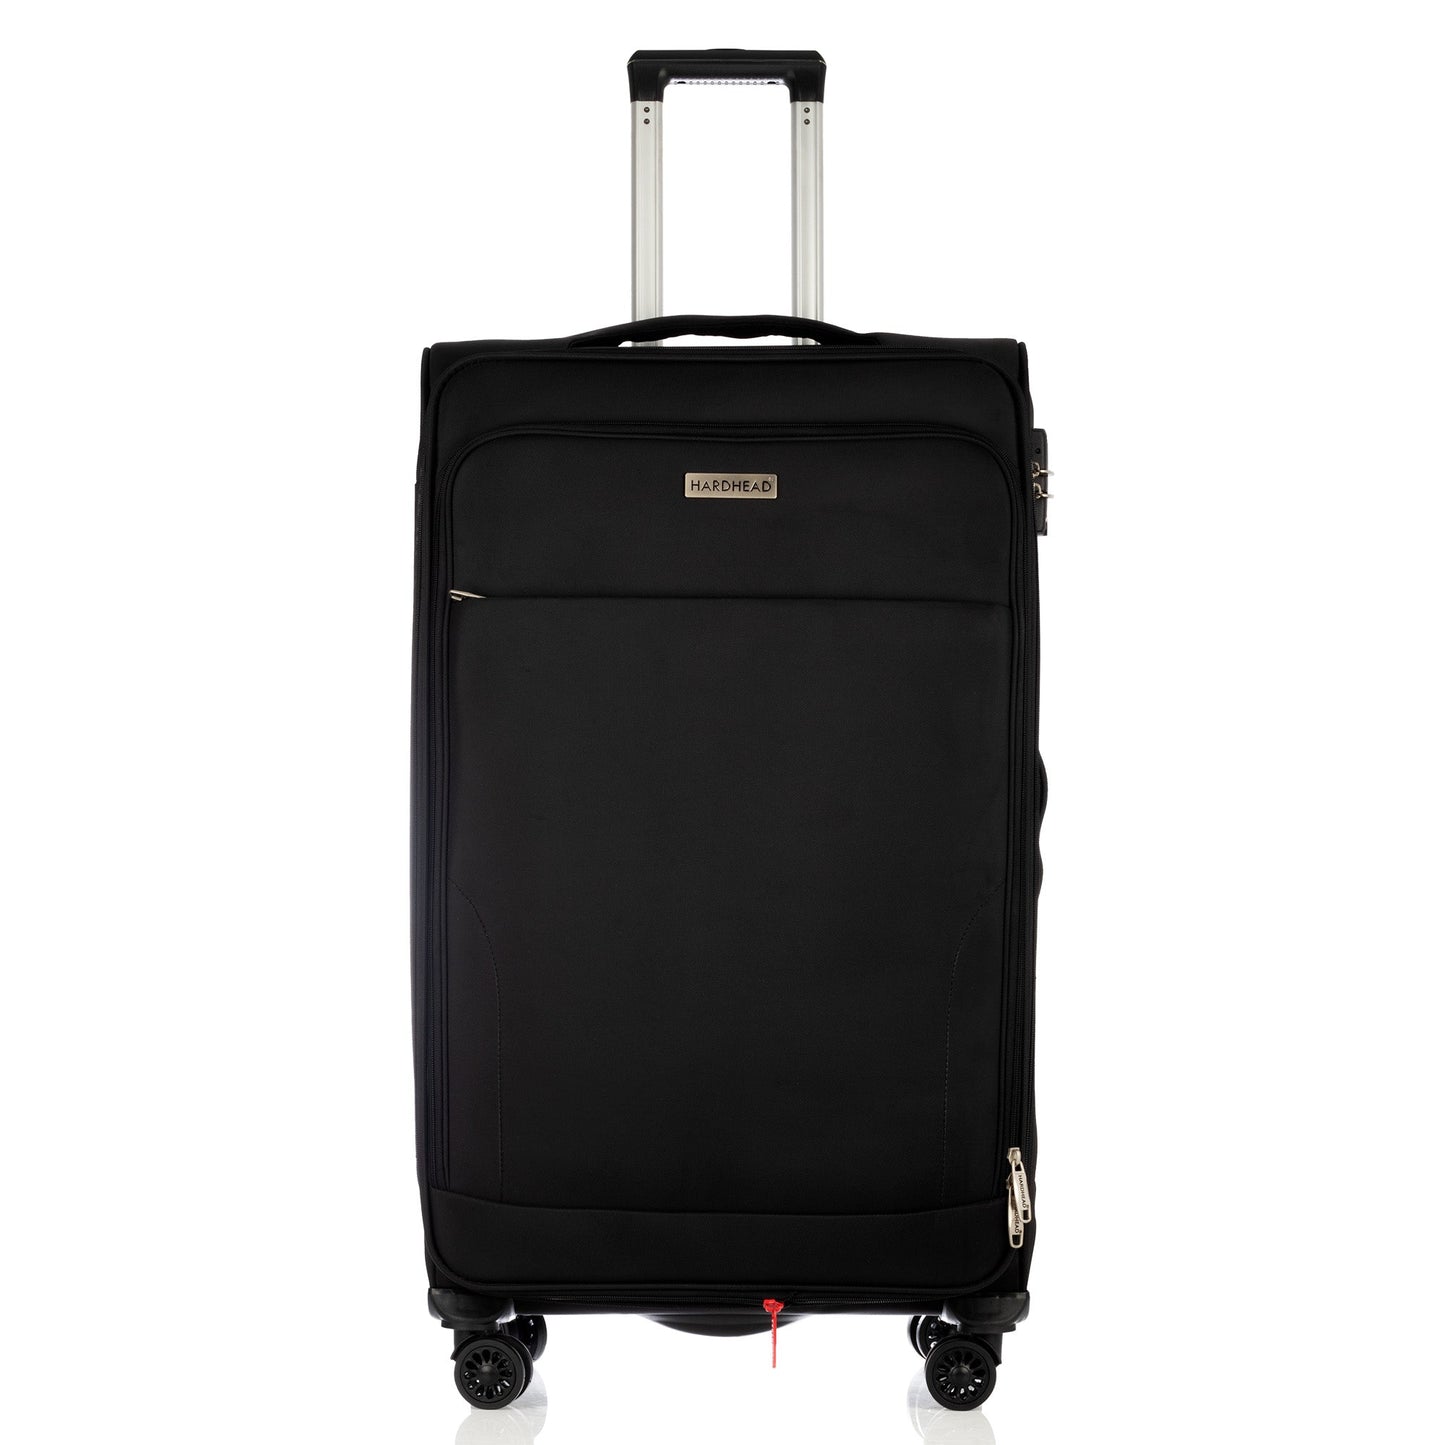 In Heaven collection black Luggage (18/20/26/30") Suitcase Lock Spinner Soft